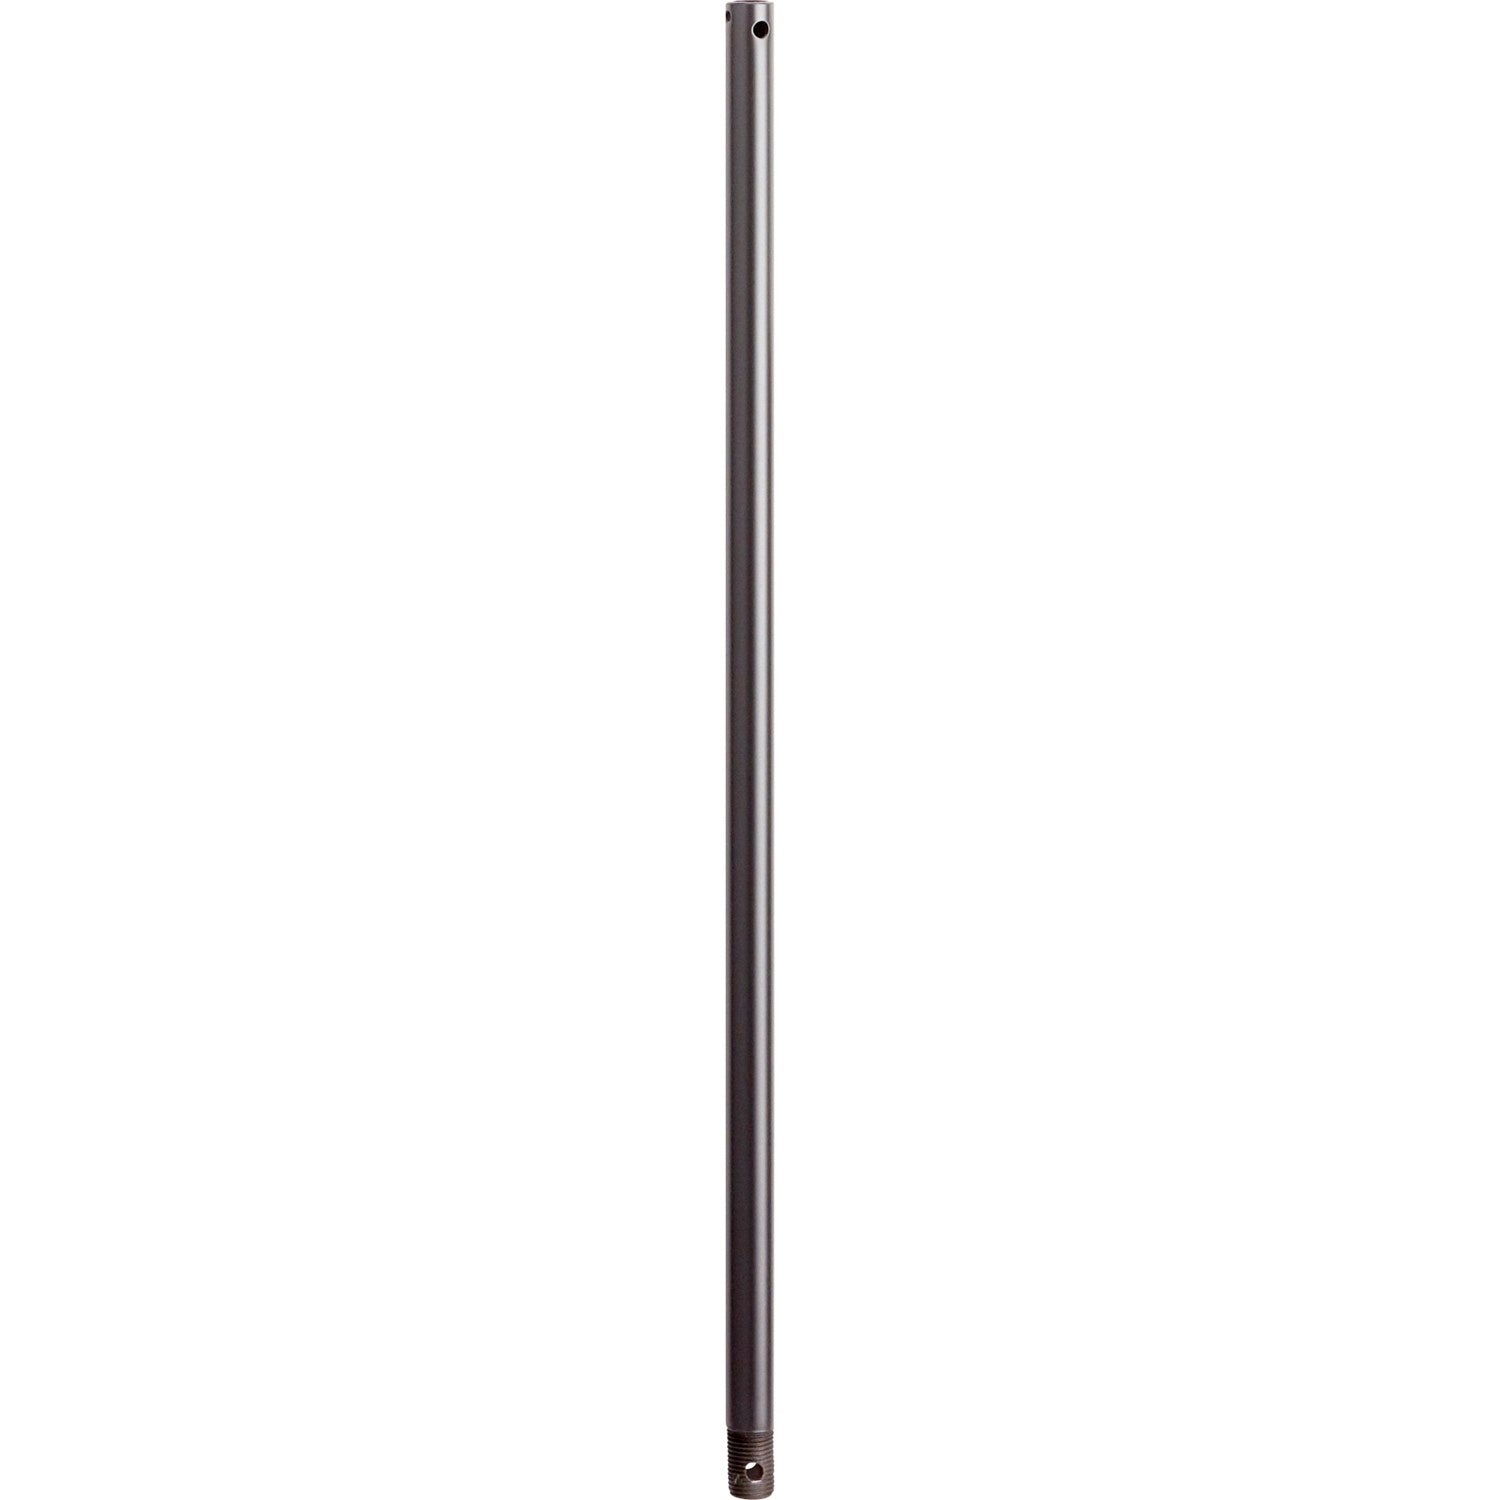 Quorum - 6-2495 - 24" Universal Downrod - 24 in. Downrods - Old World